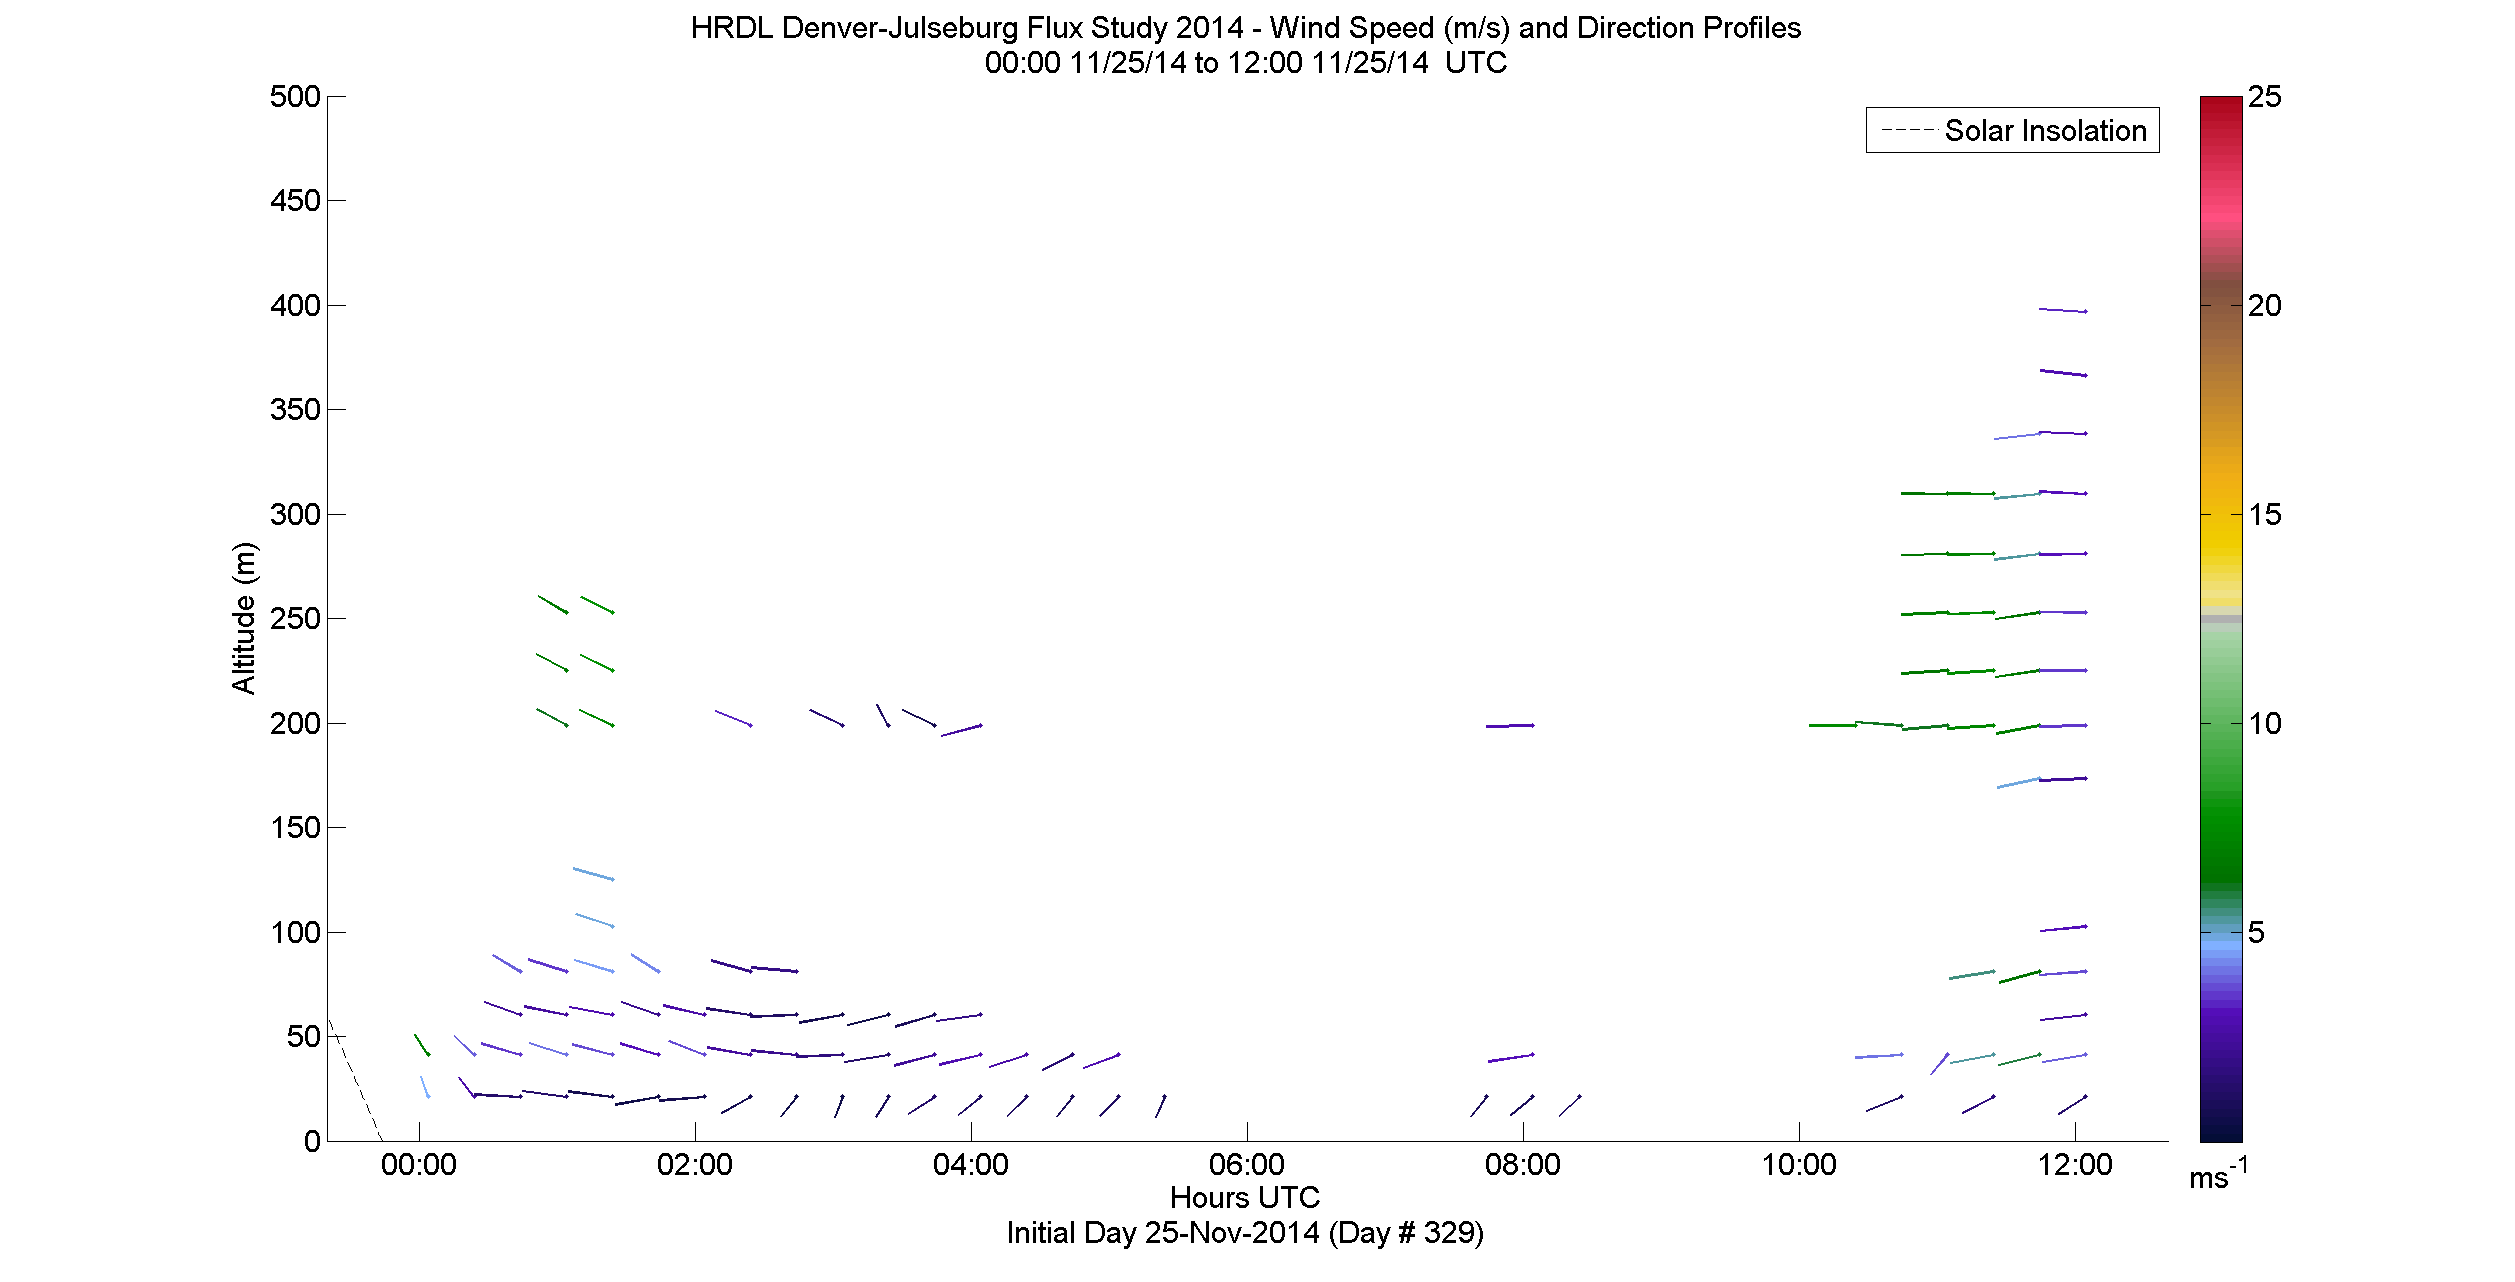 HRDL speed and direction profile - November 25 am